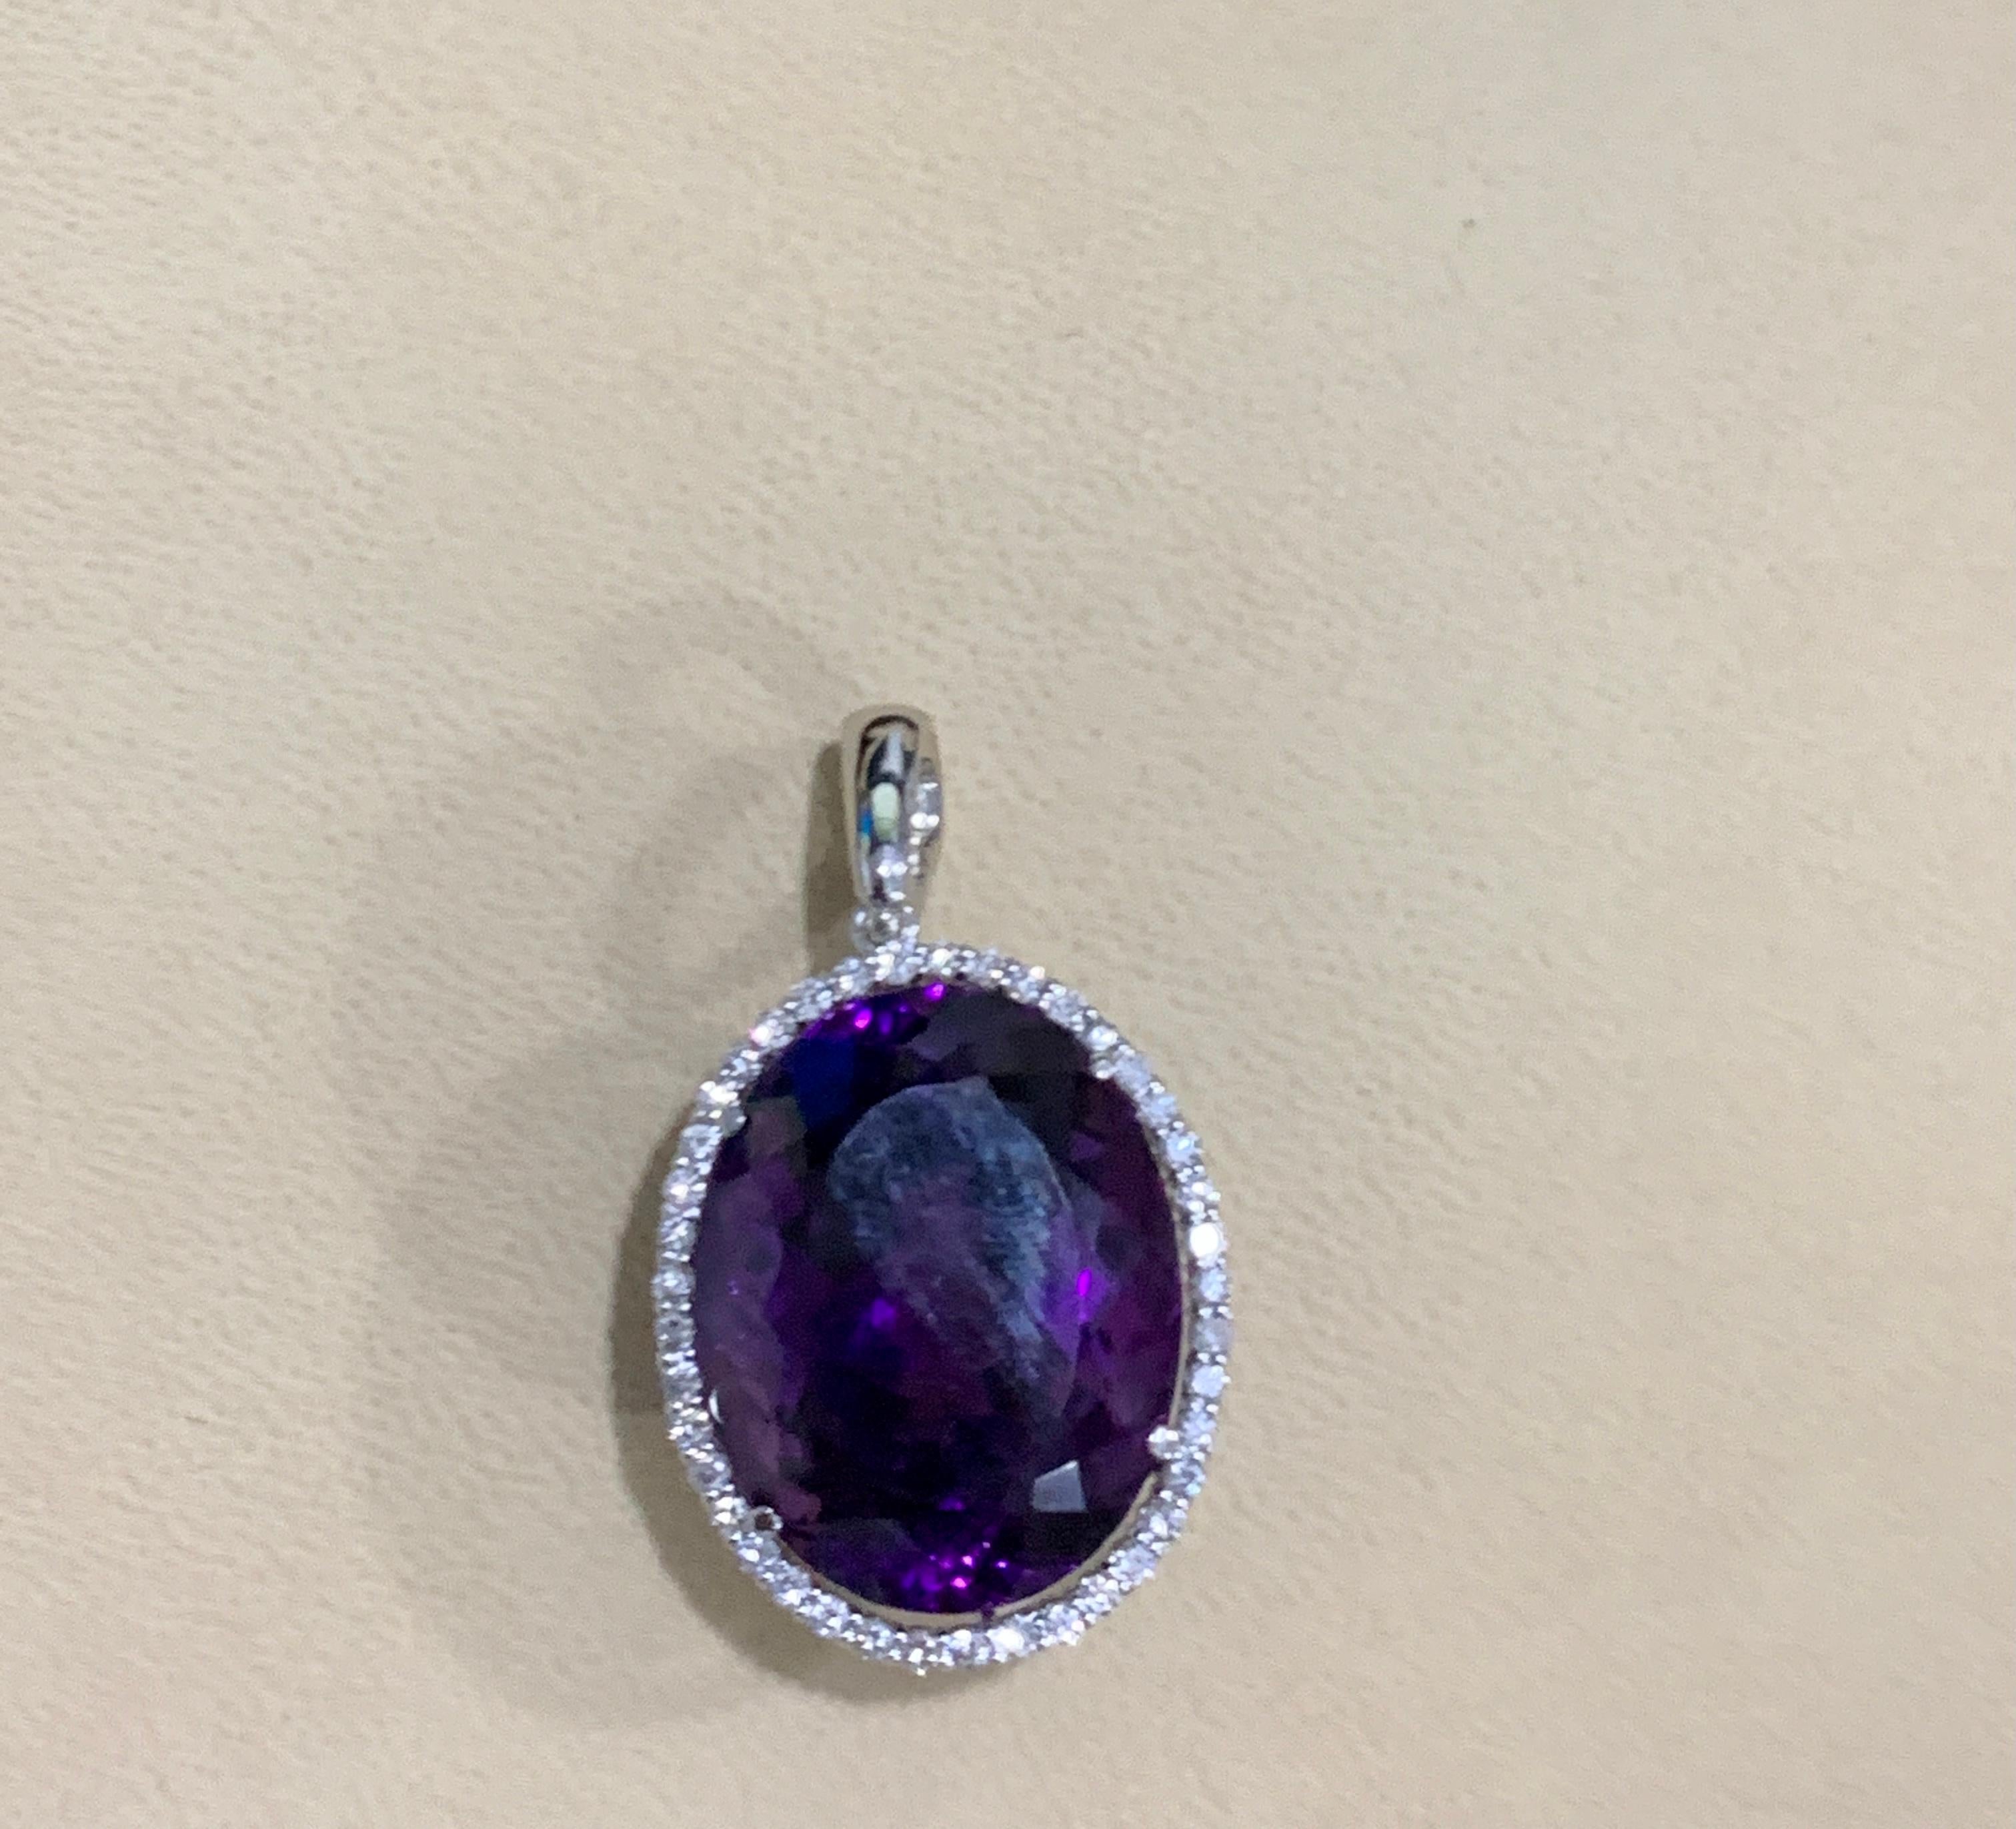 68 Carat Amethyst & 2.2 ct Diamond Pendant Necklace 14 Karat White Gold + Chain In Excellent Condition For Sale In New York, NY